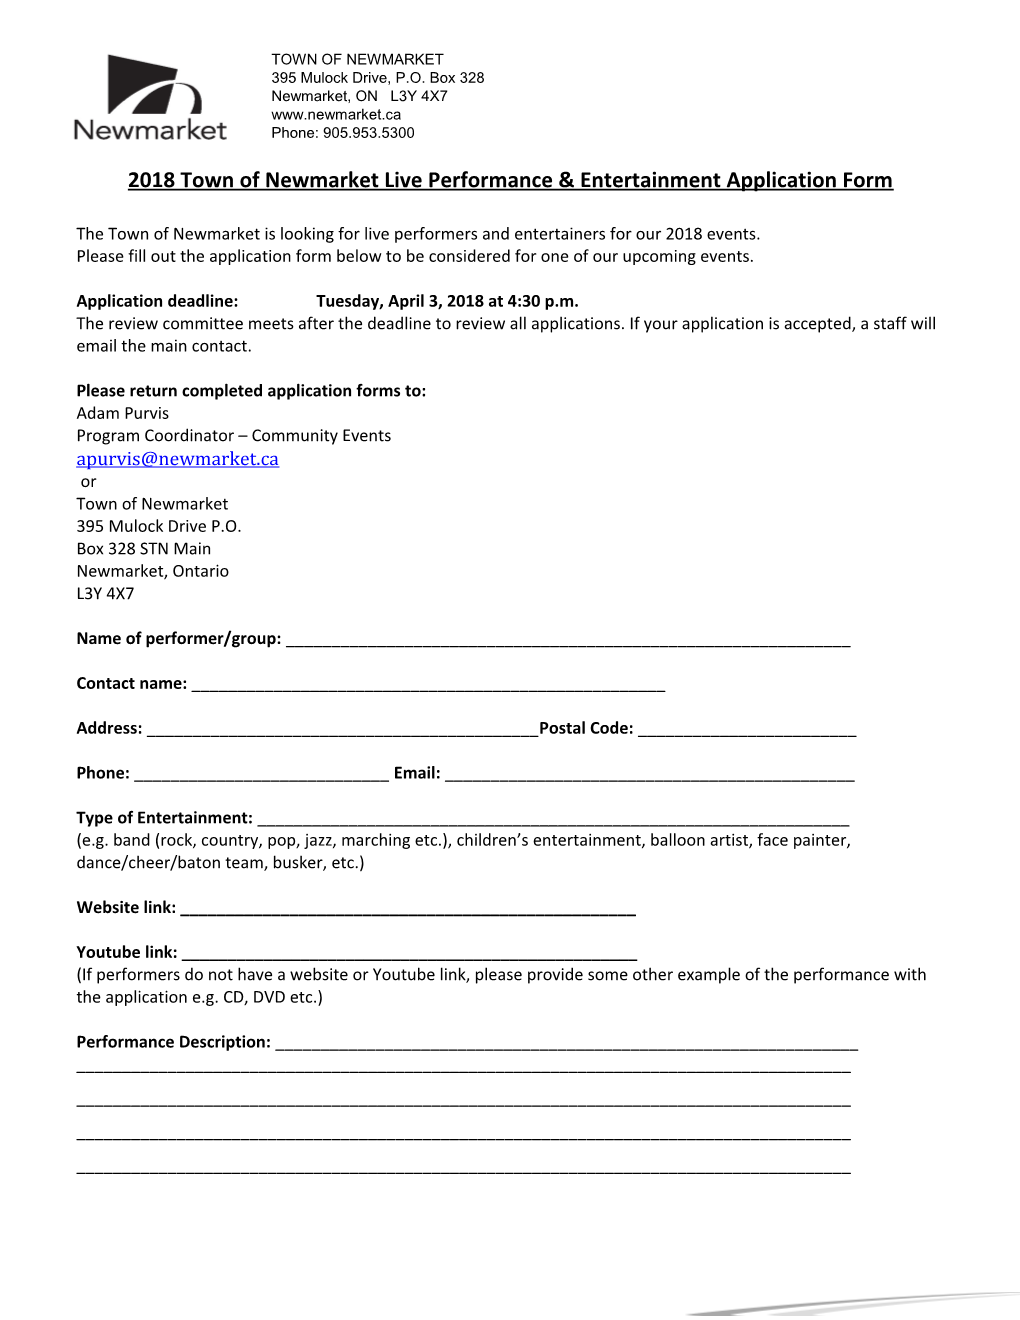 2018Town of Newmarket Live Performance & Entertainment Application Form